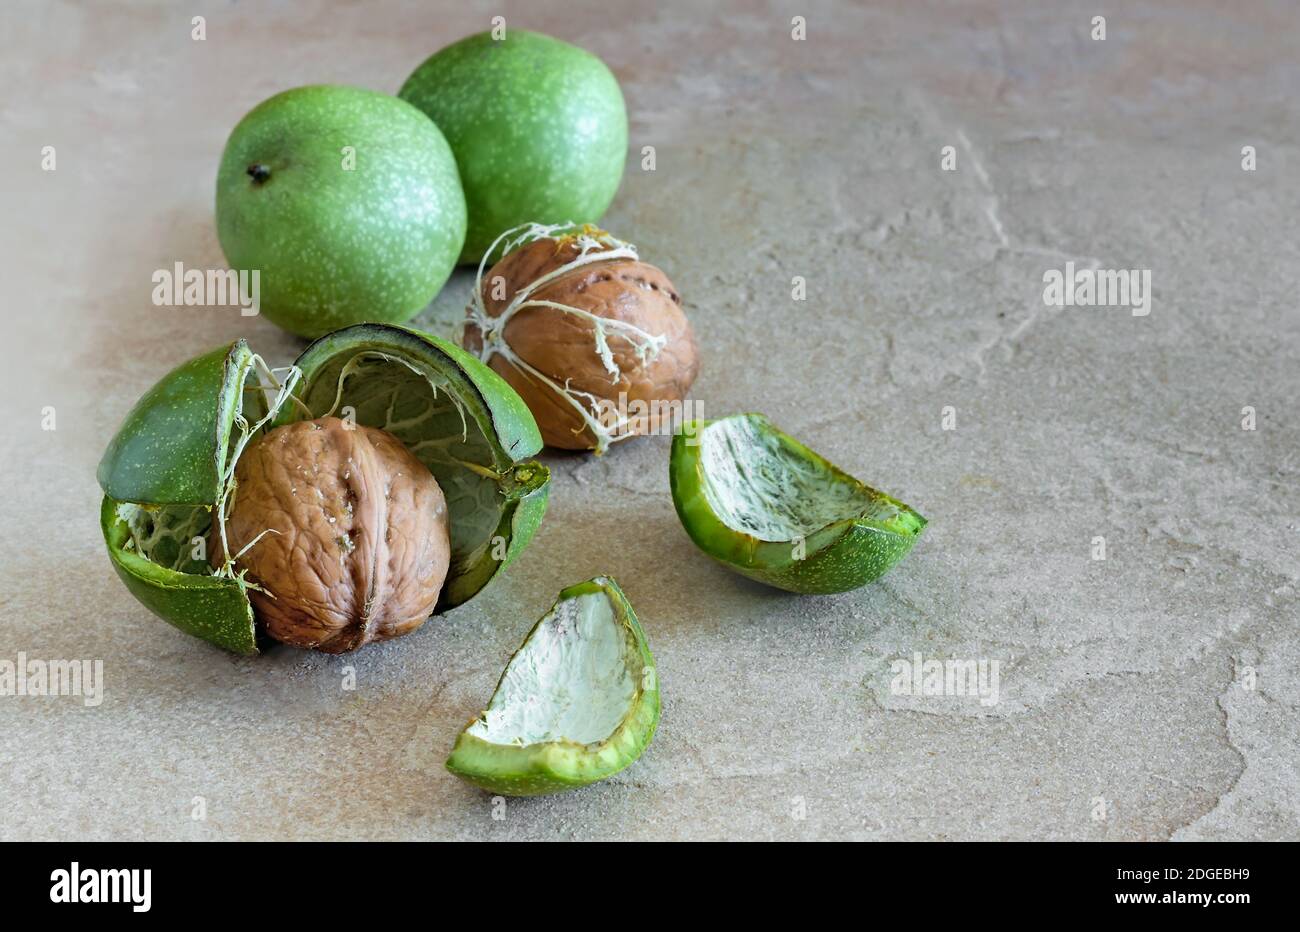 Walnuts in a green shell on the table Stock Photo